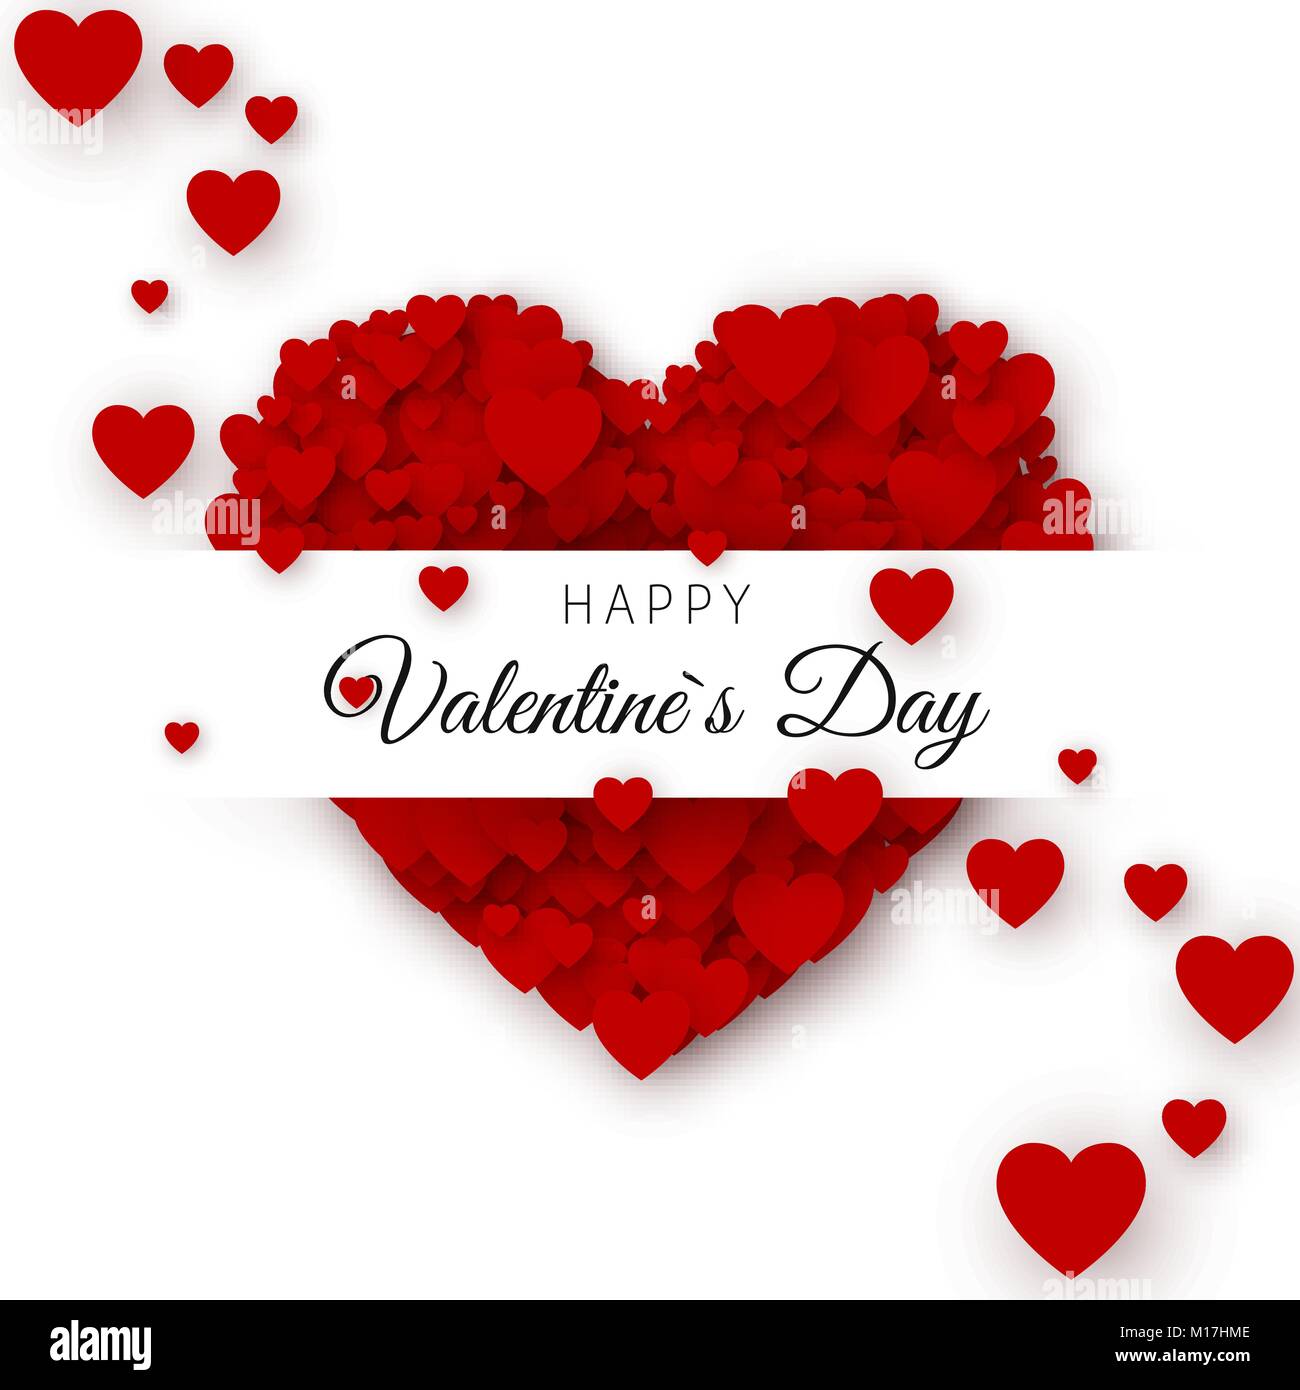 Happy Valentines Day Handwritten Calligraphic Lettering With Red Hearts  Stock Illustration - Download Image Now - iStock